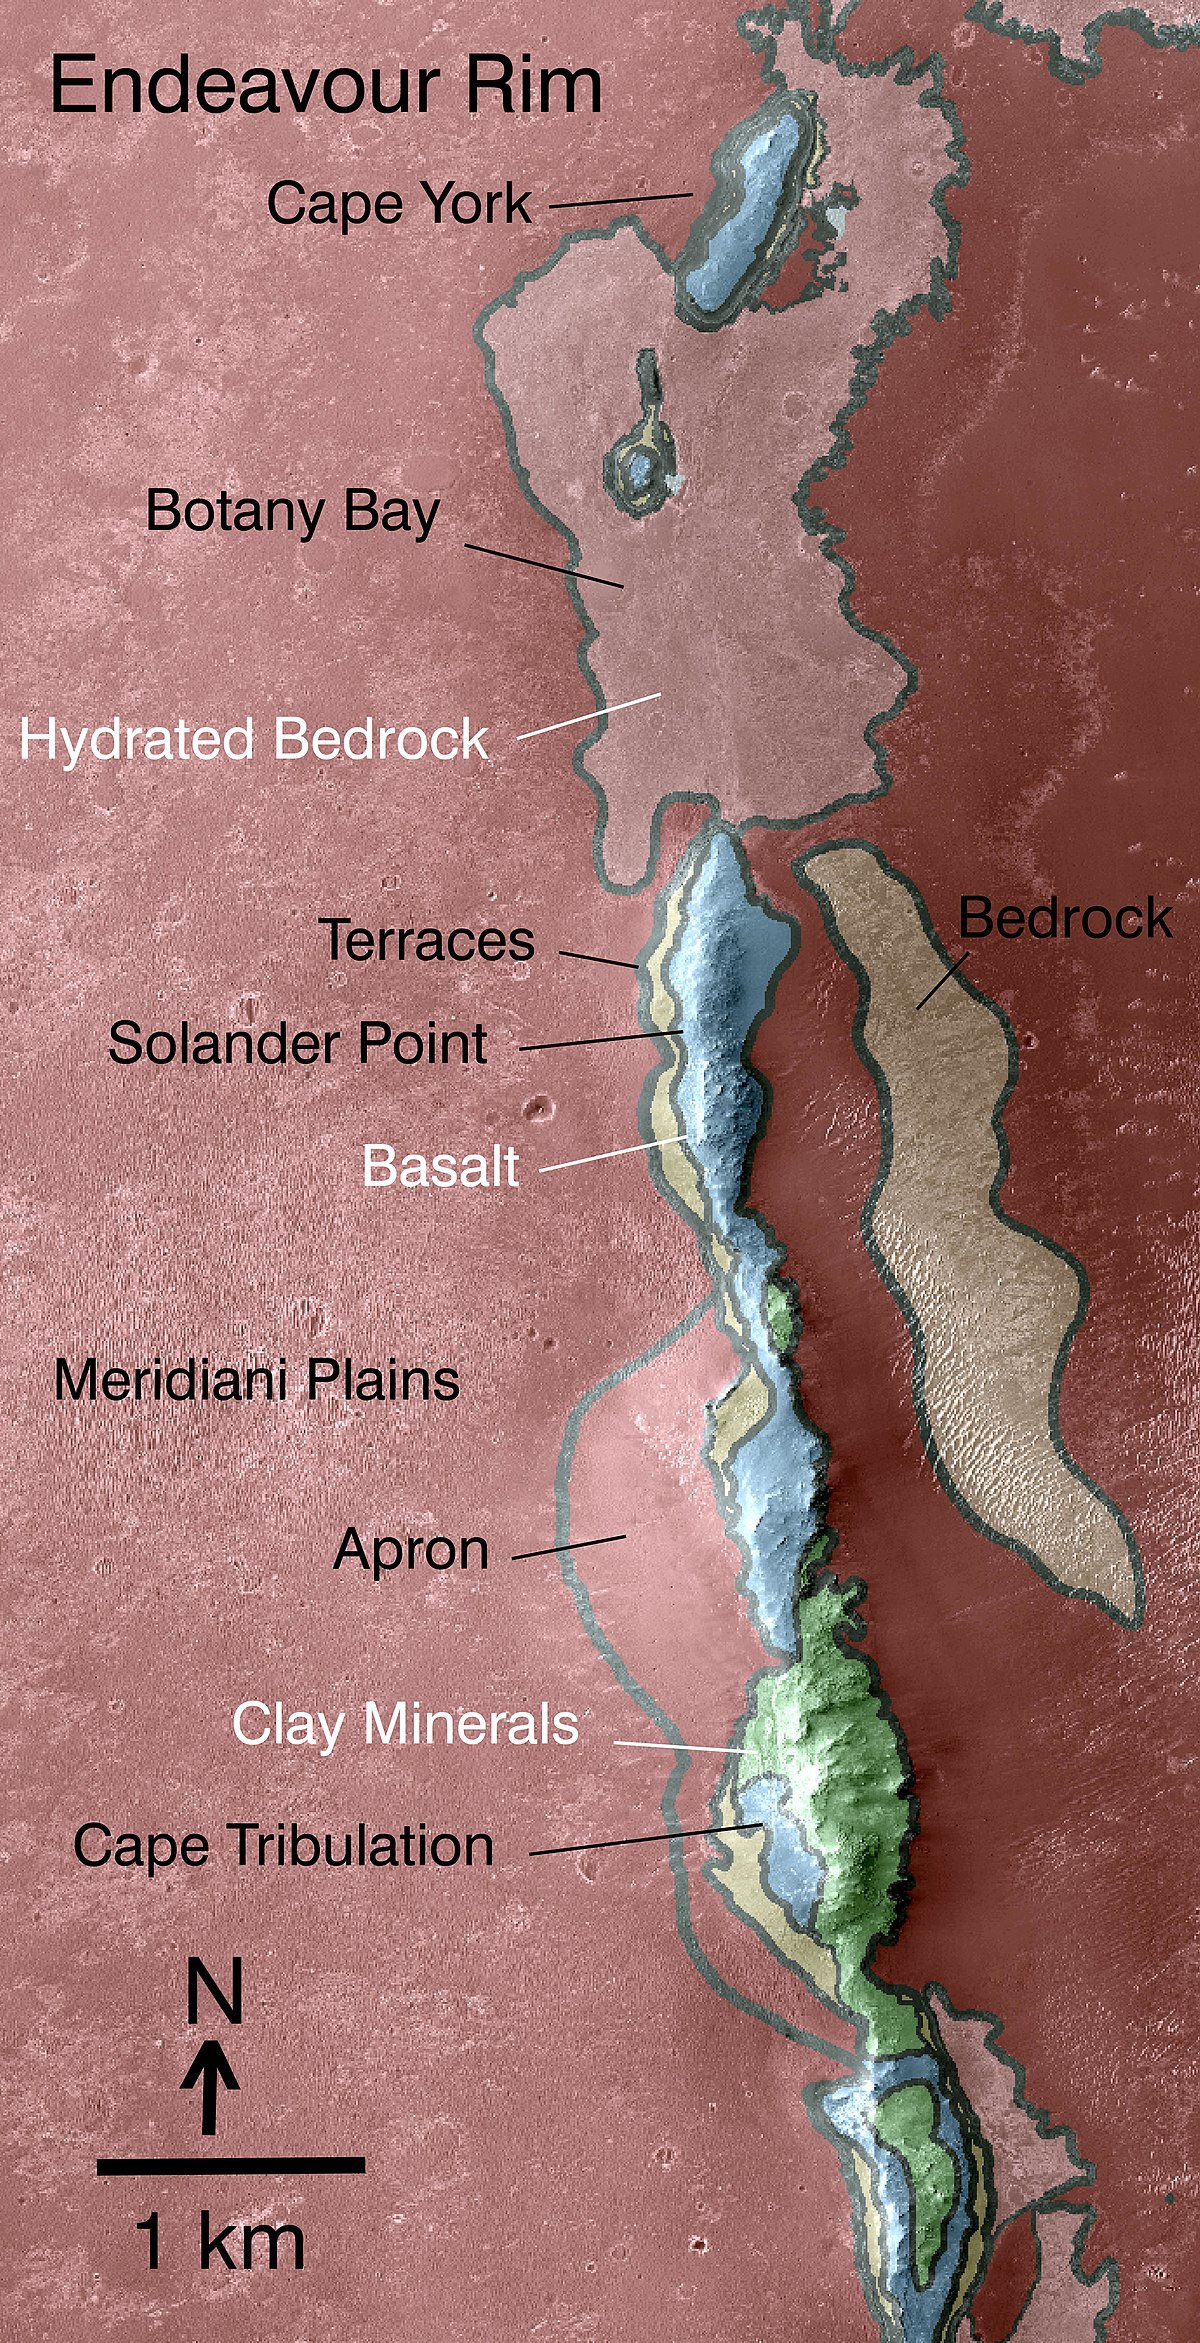 Solander Point is a location on the Western Rim of Endeavour crater, shown here in this geological map produced with data from MRO's CRISM instrument PIA13708westernrimgeo.jpg